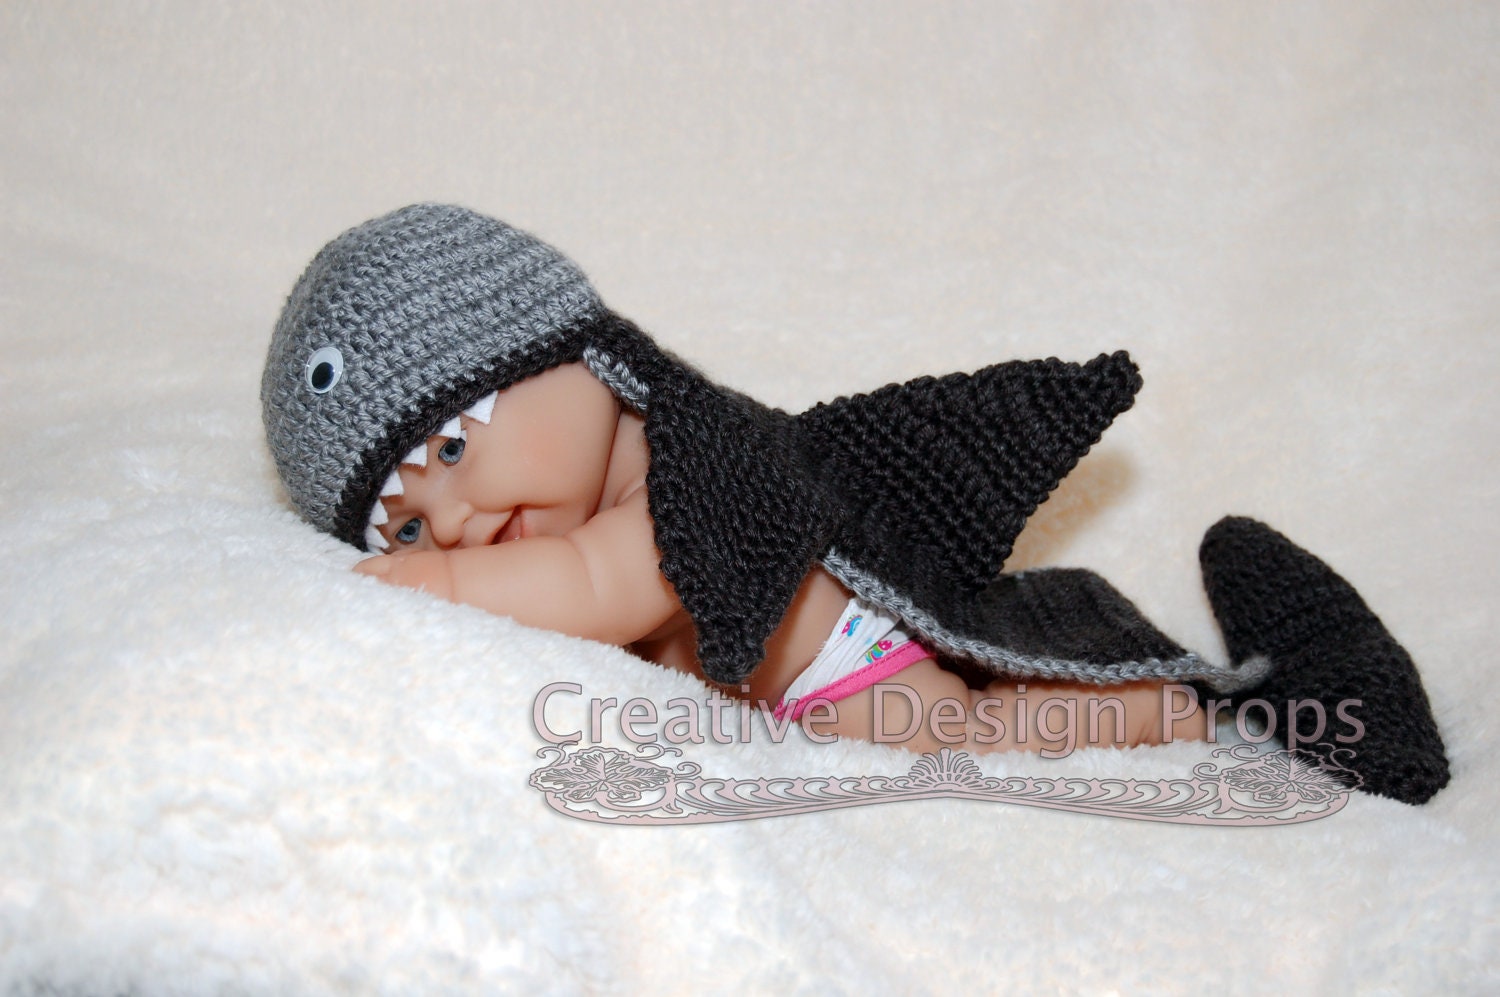 Crochet Shark Cape Newborn Baby Hat and Back Cover Set Halloween Costume  Photo Prop for Baby Baby Shower Gift 